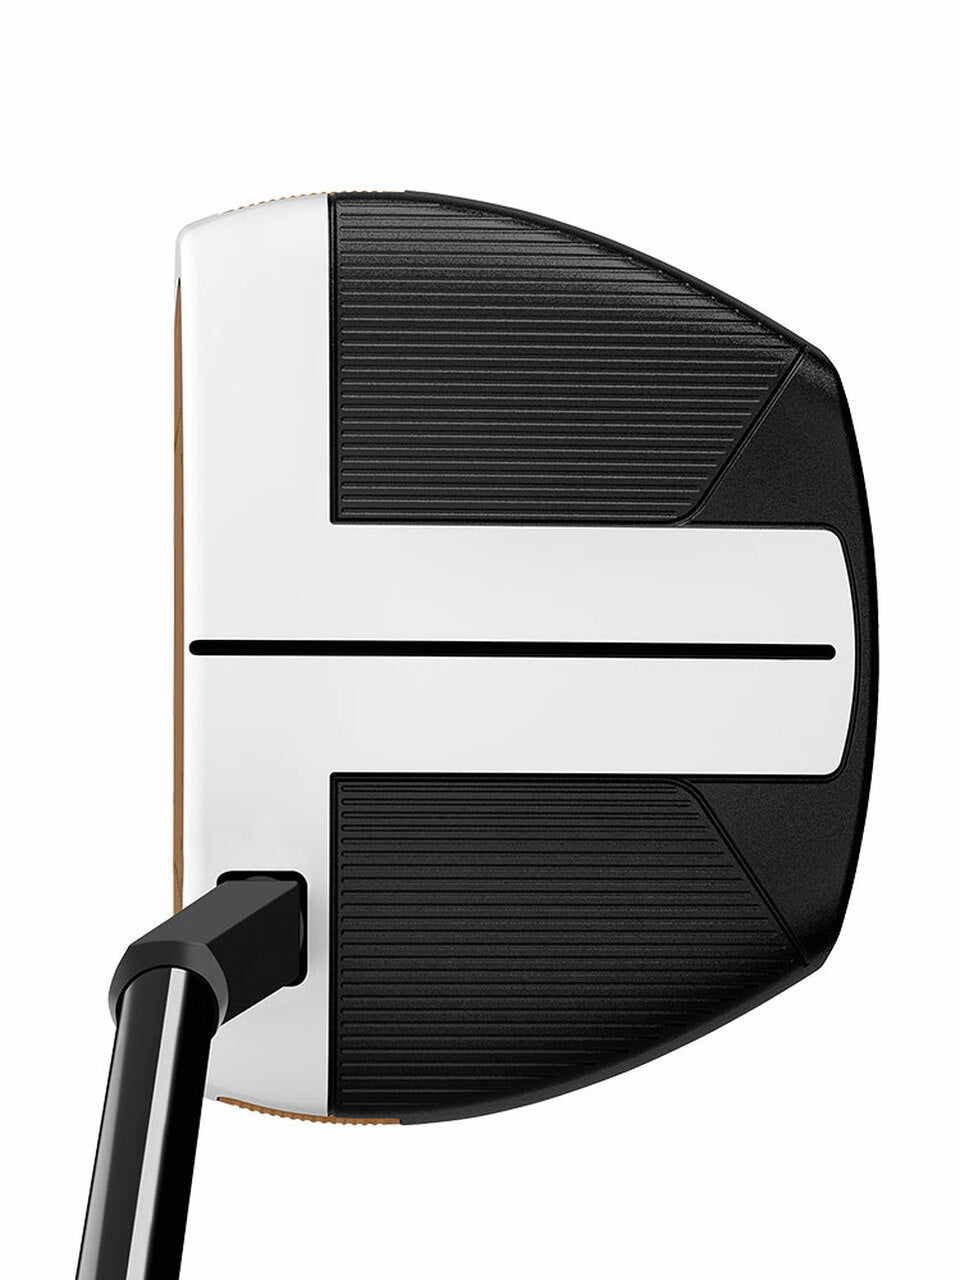 Taylormade Spider FCG Putter #3